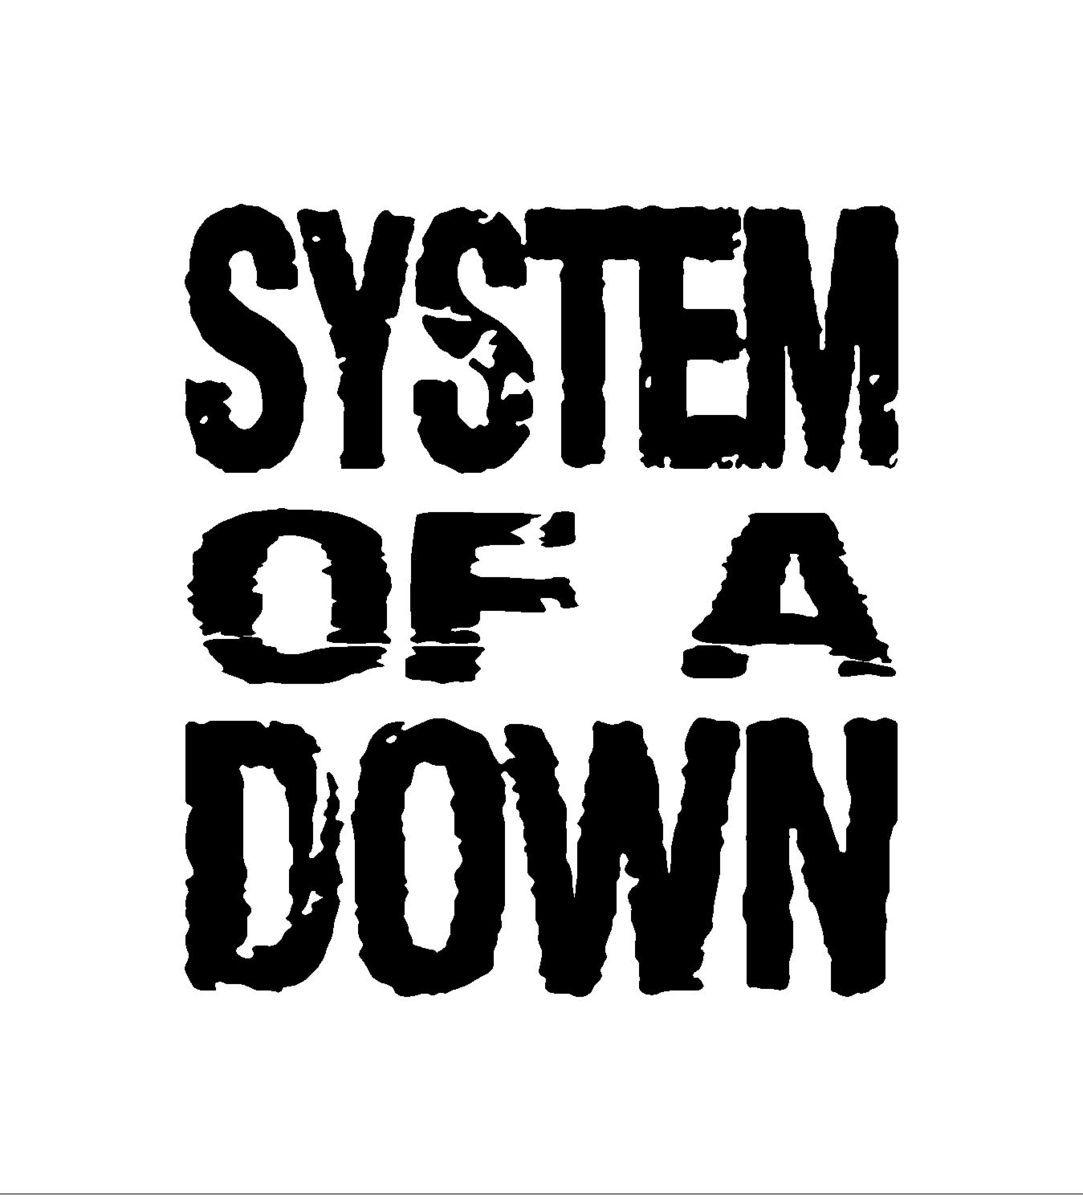 System of a Down Logo - System of a Down SOAD Band Logo Vinyl Decal Car Window Laptop Guitar